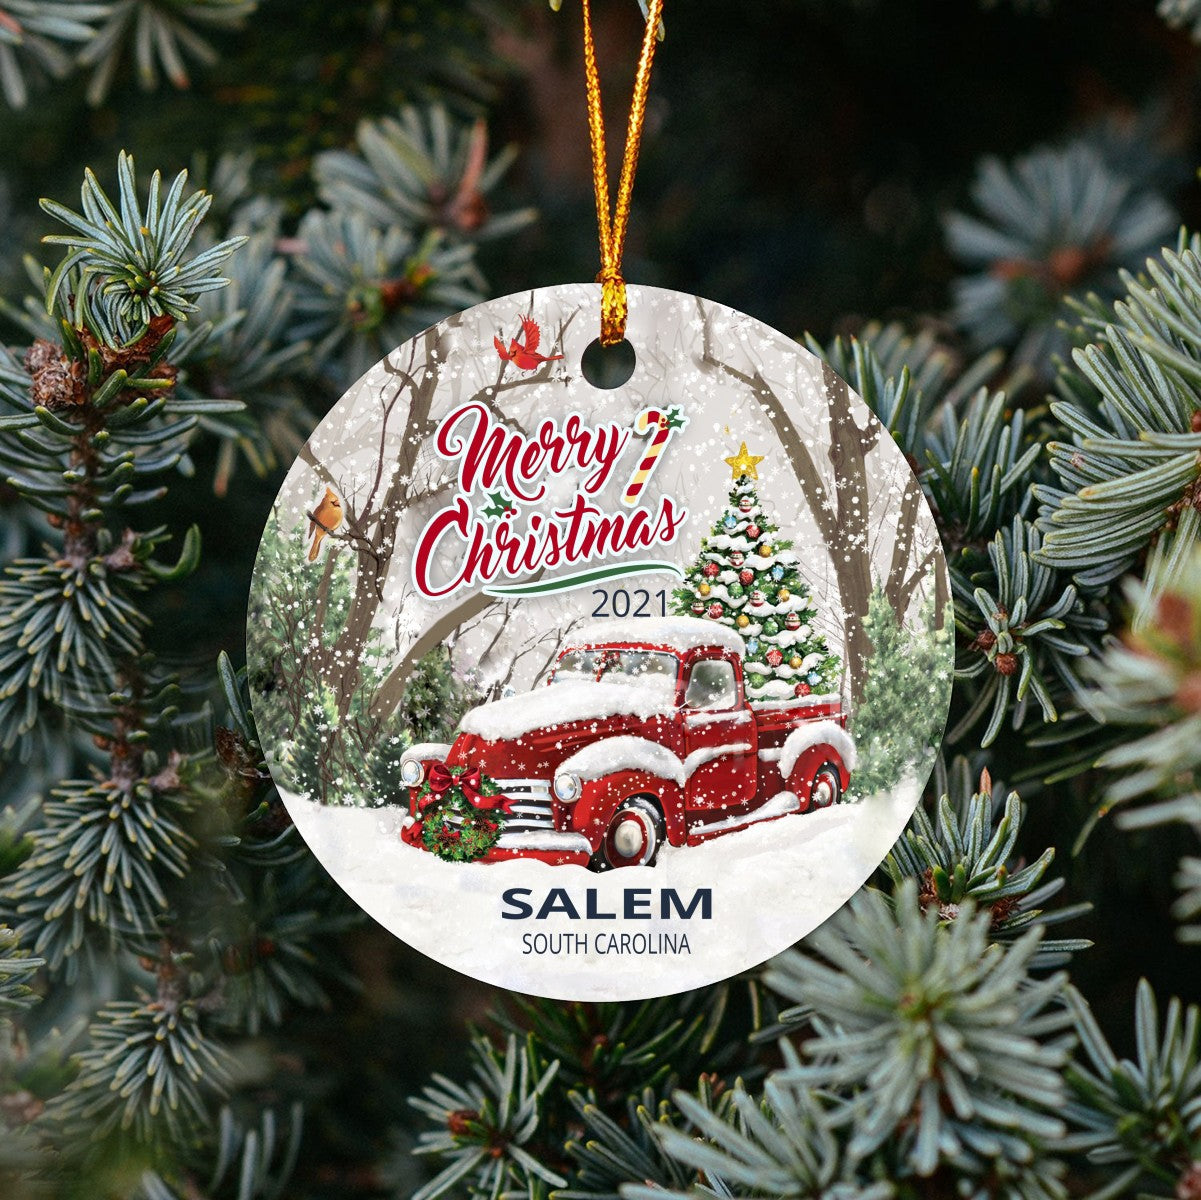 Christmas Tree Ornaments Salem - Ornament With Name City, State Salem South Carolina SC Ornament - Red Truck Xmas Ornaments 3'' Plastic Gift For Family, Friend And Housewarming